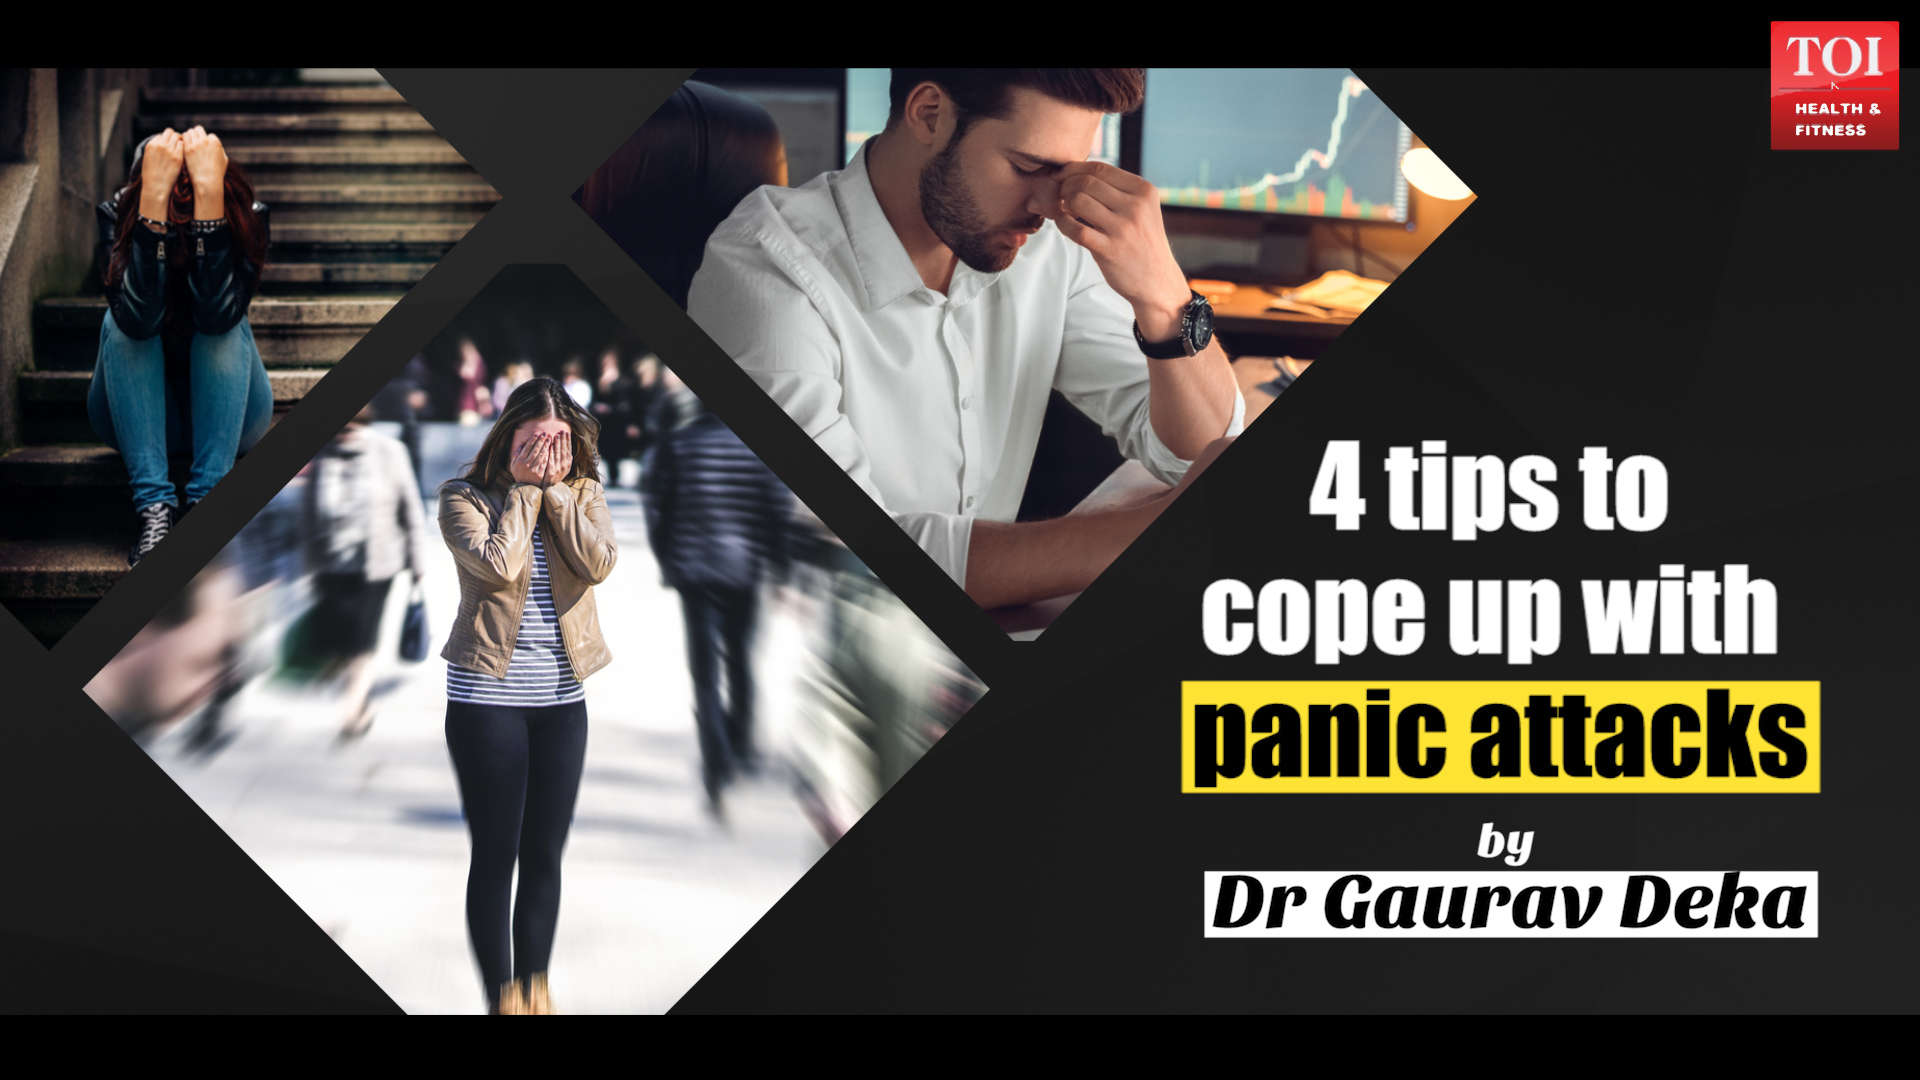 Video: 4 tips to stop a panic attack of India